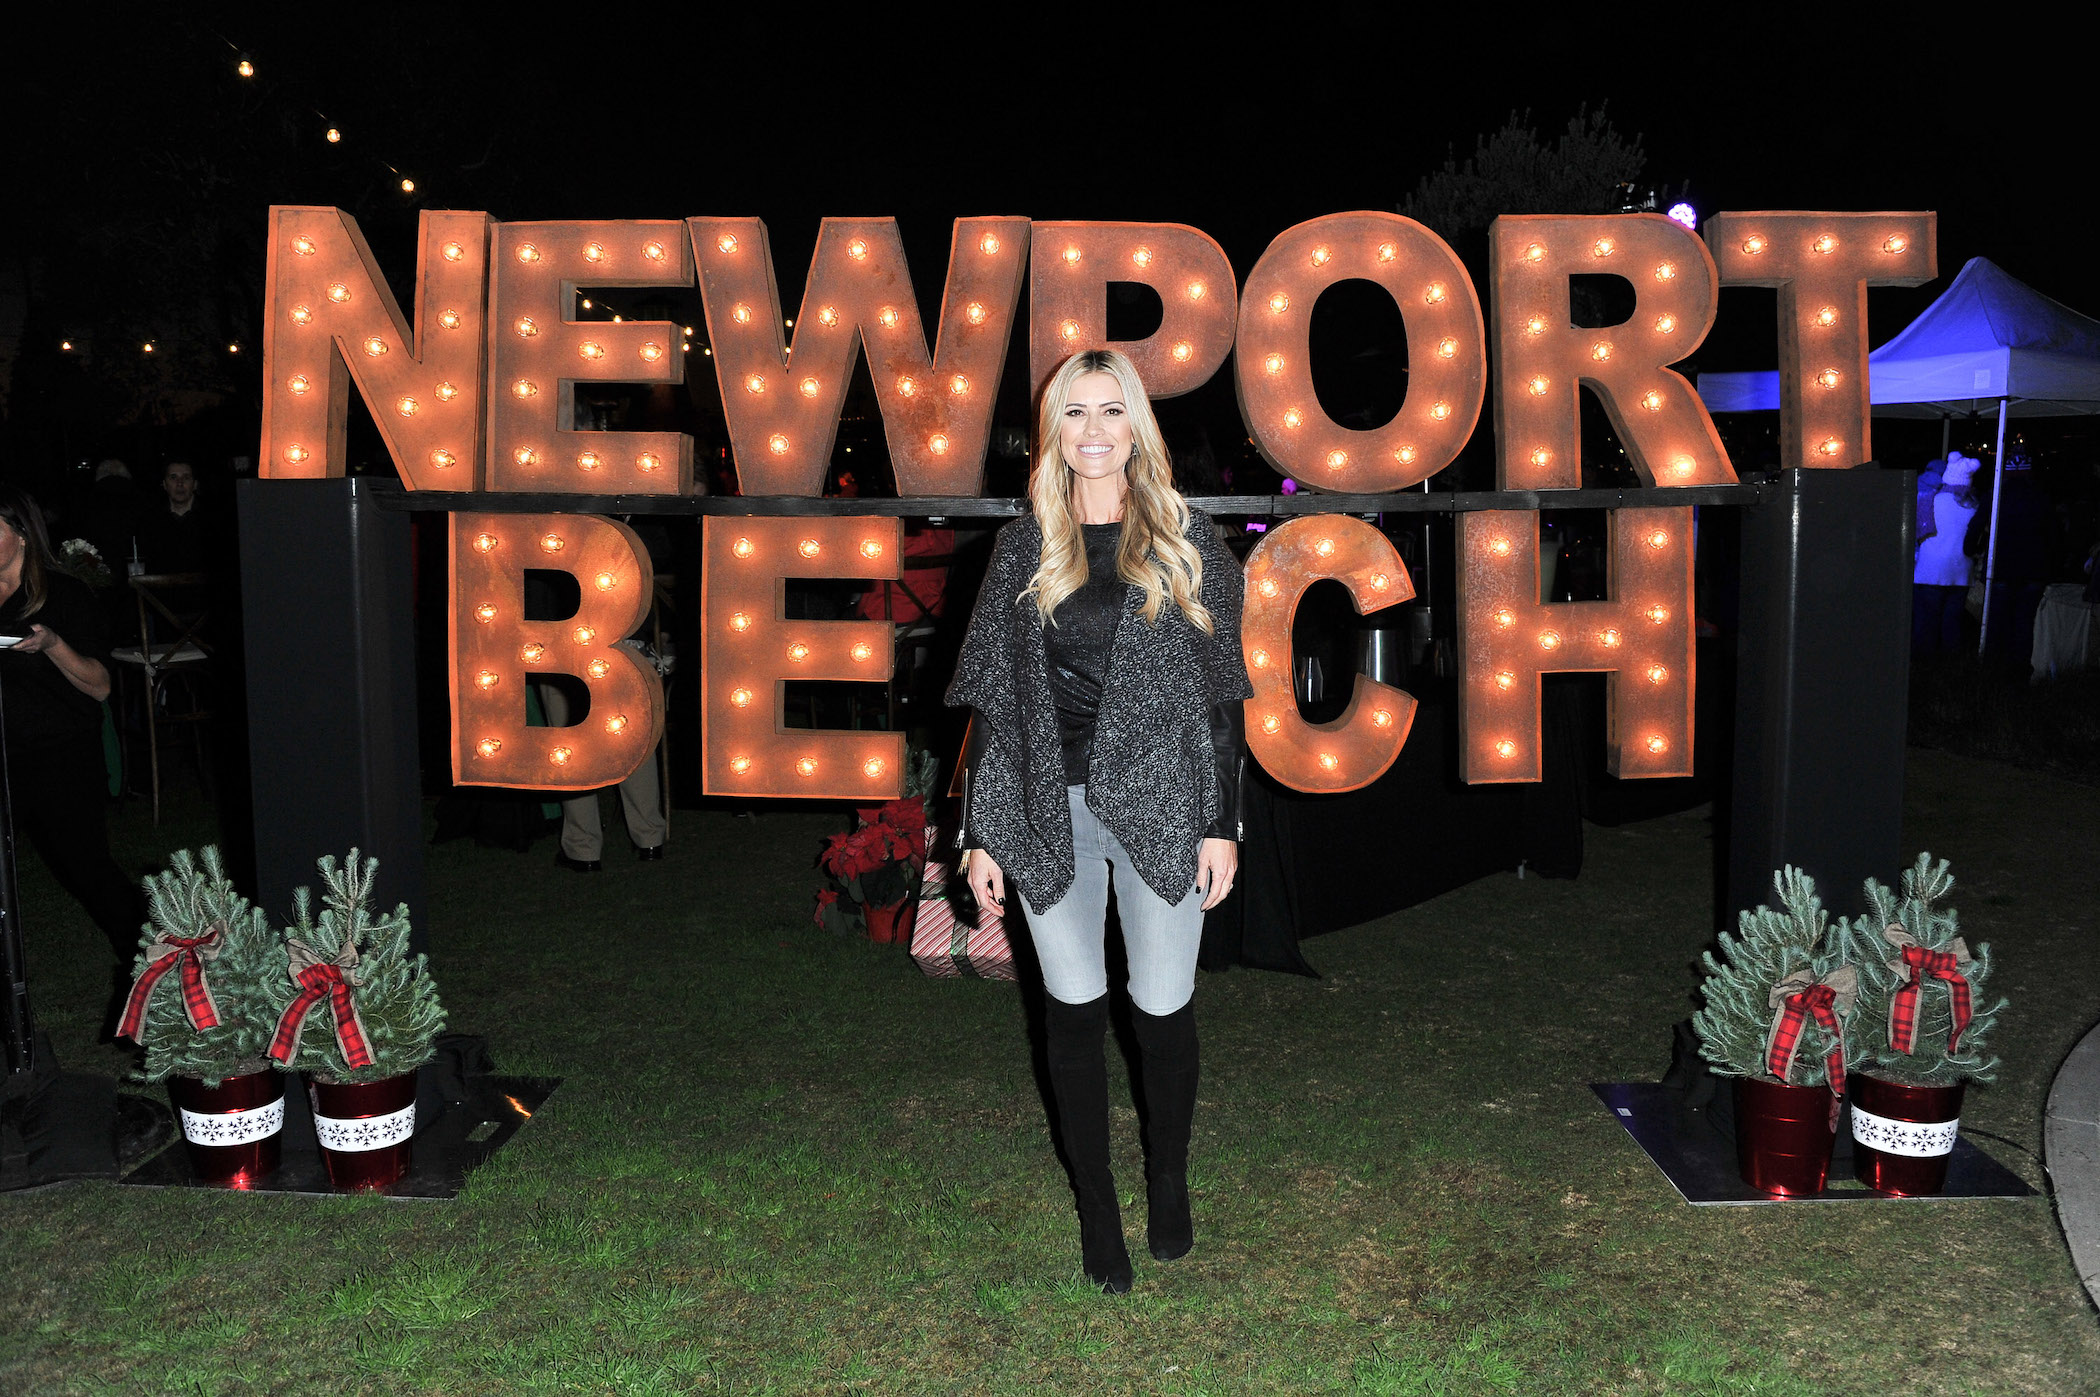 Christina Haack smiling in front of a Newport Beach sign at night